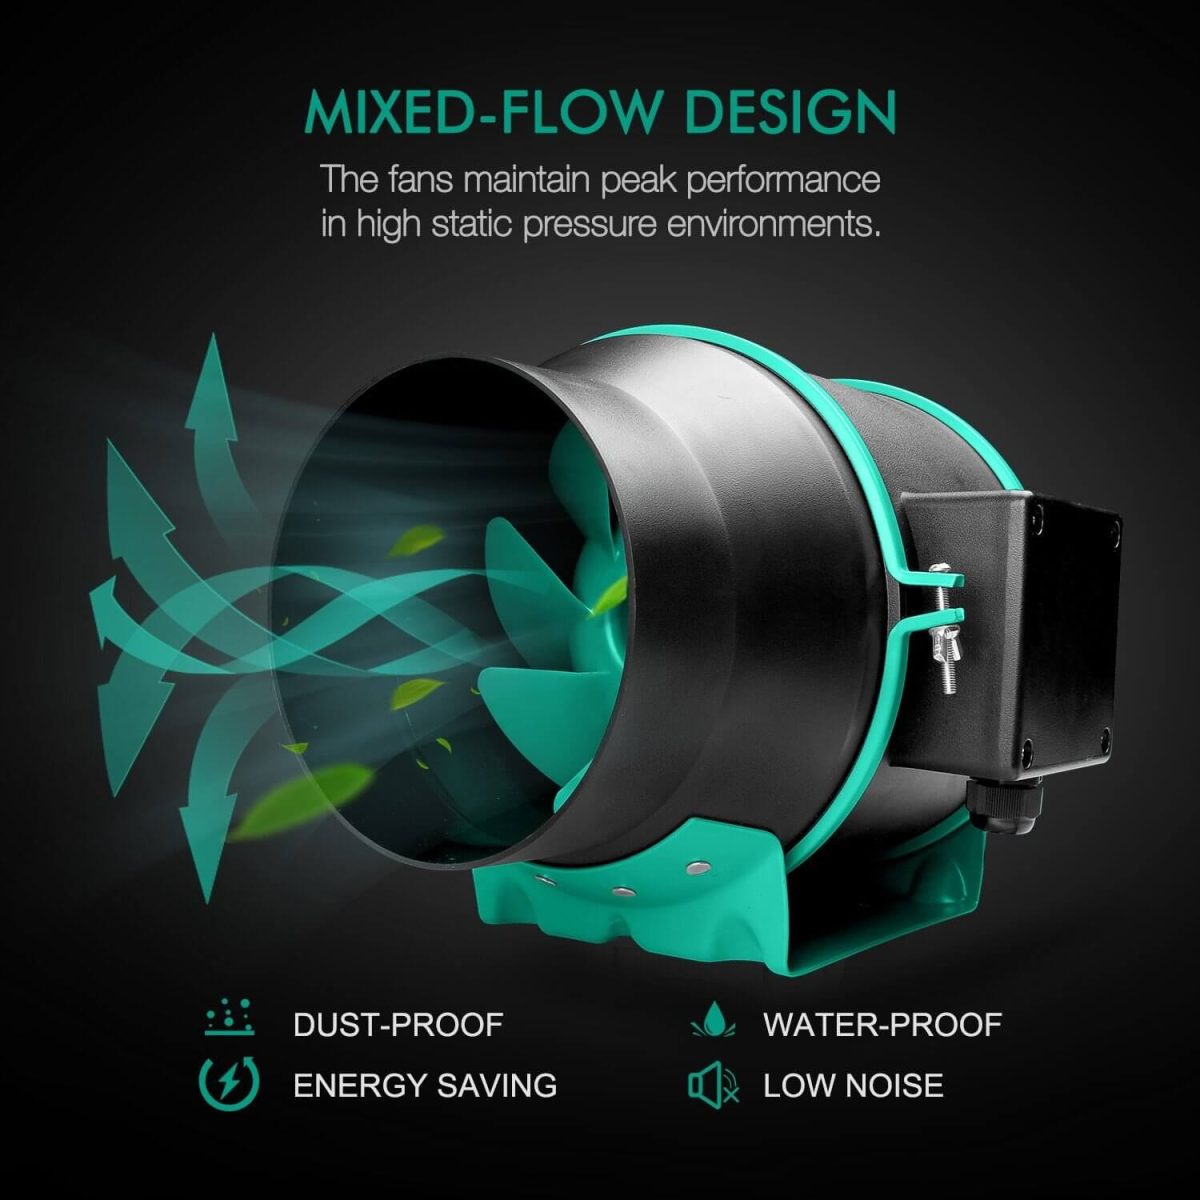 Super quality of mars hydro inline fan, be concentrate on every details